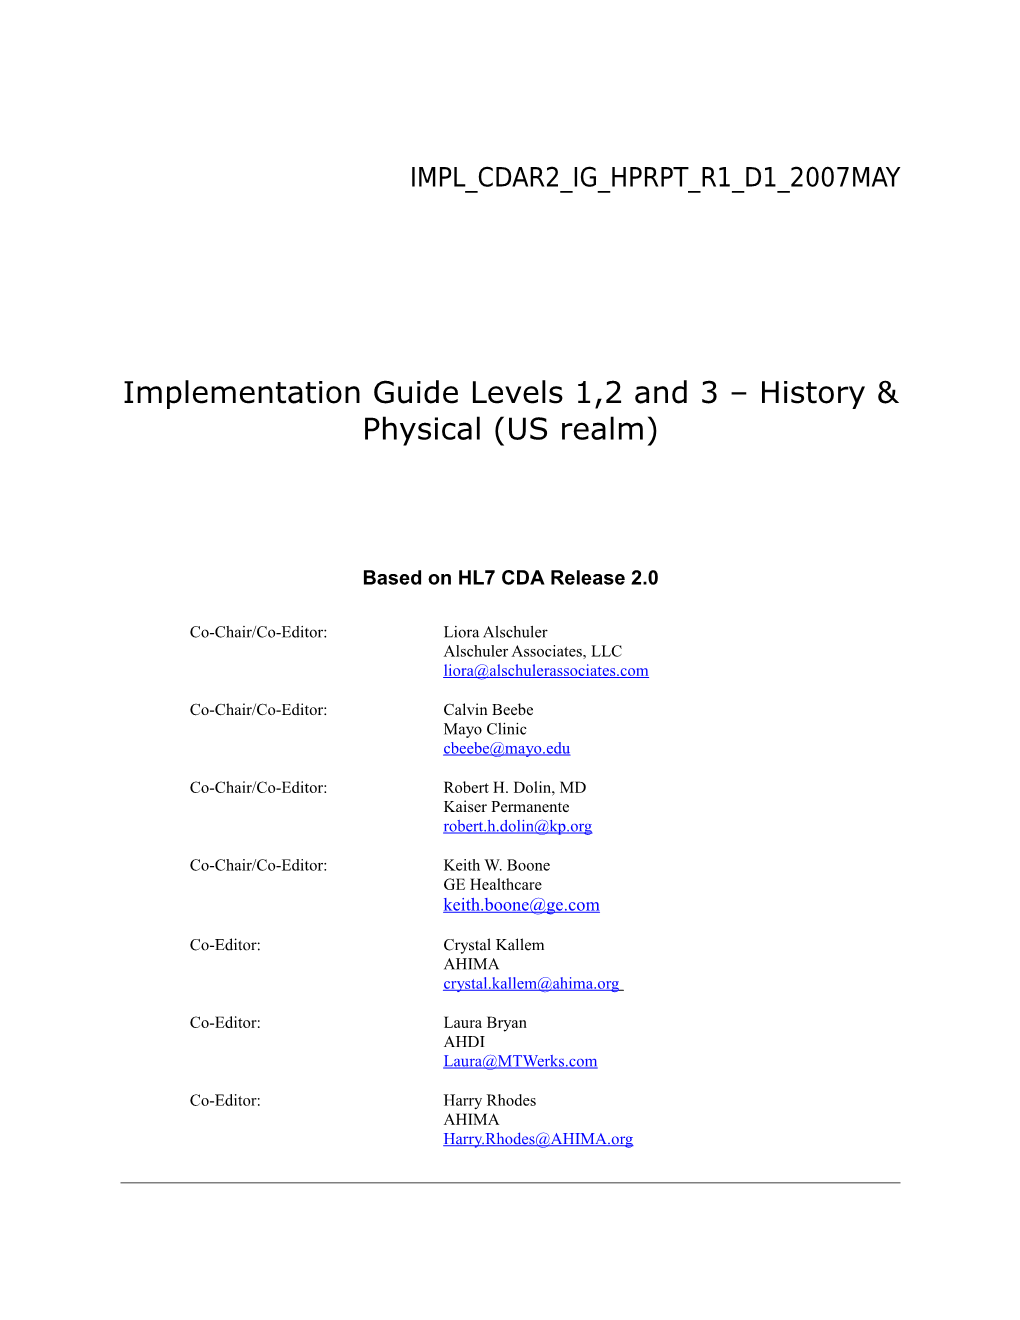 Implementation Guide Levels 1,2 and 3 History & Physical (US Realm)